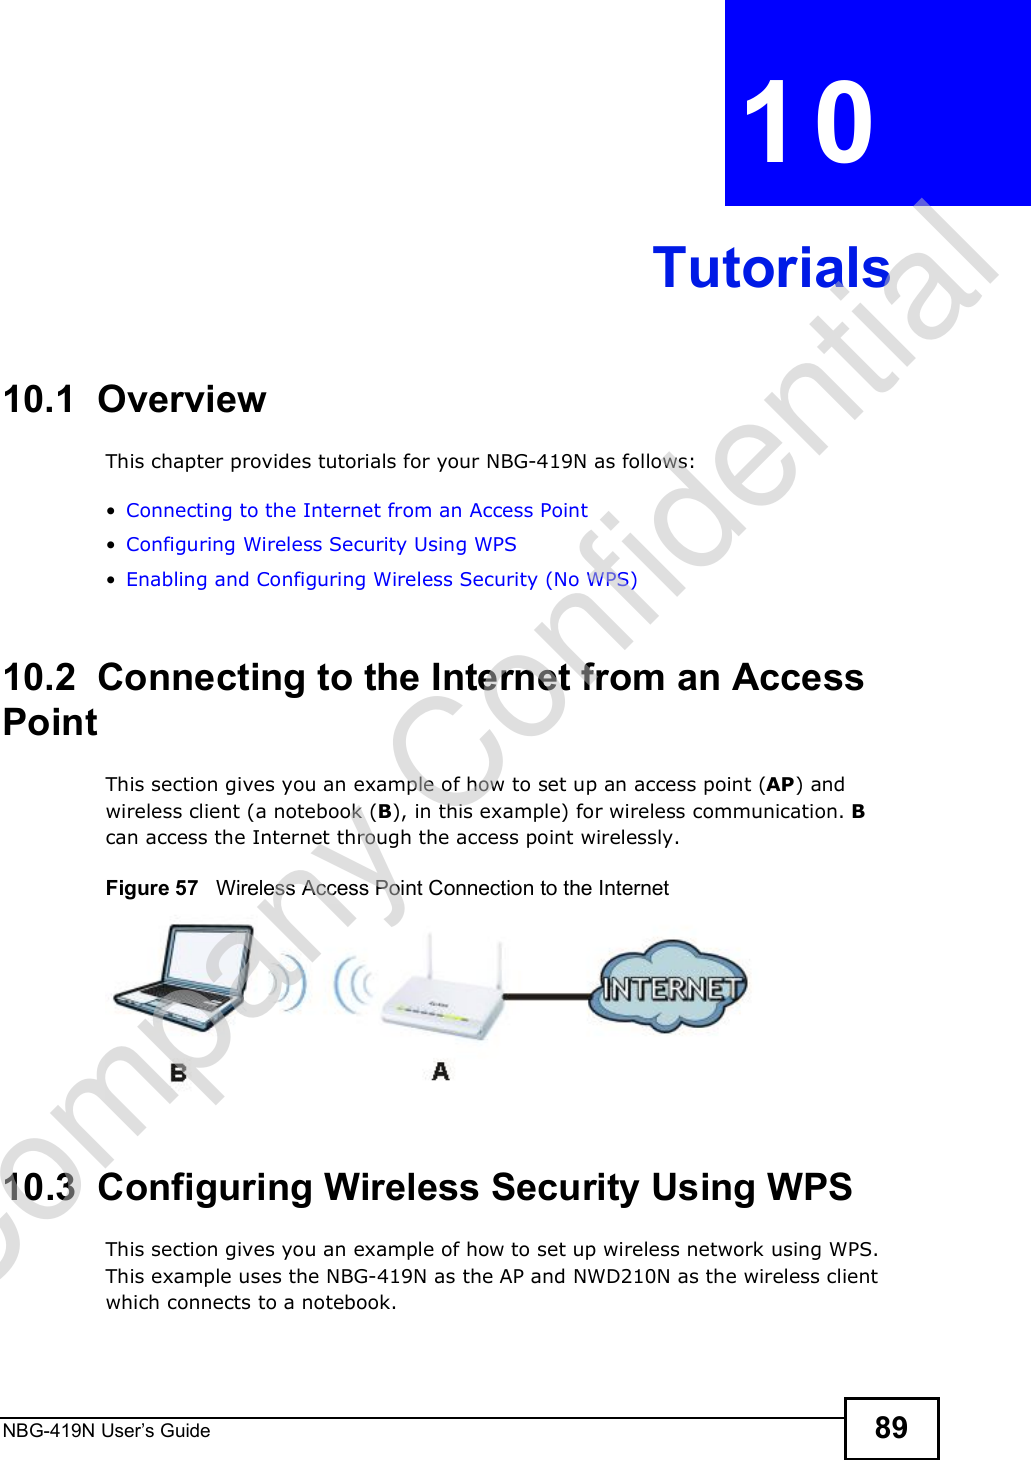 NBG-419N User s Guide 89CHAPTER  10 Tutorials10.1  OverviewThis chapter provides tutorials for your NBG-419N as follows: Connecting to the Internet from an Access Point Configuring Wireless Security Using WPS Enabling and Configuring Wireless Security (No WPS)10.2  Connecting to the Internet from an Access PointThis section gives you an example of how to set up an access point (AP) and wireless client (a notebook (B), in this example) for wireless communication. B can access the Internet through the access point wirelessly.Figure 57   Wireless Access Point Connection to the Internet10.3  Configuring Wireless Security Using WPSThis section gives you an example of how to set up wireless network using WPS. This example uses the NBG-419N as the AP and NWD210N as the wireless client which connects to a notebook. Company Confidential